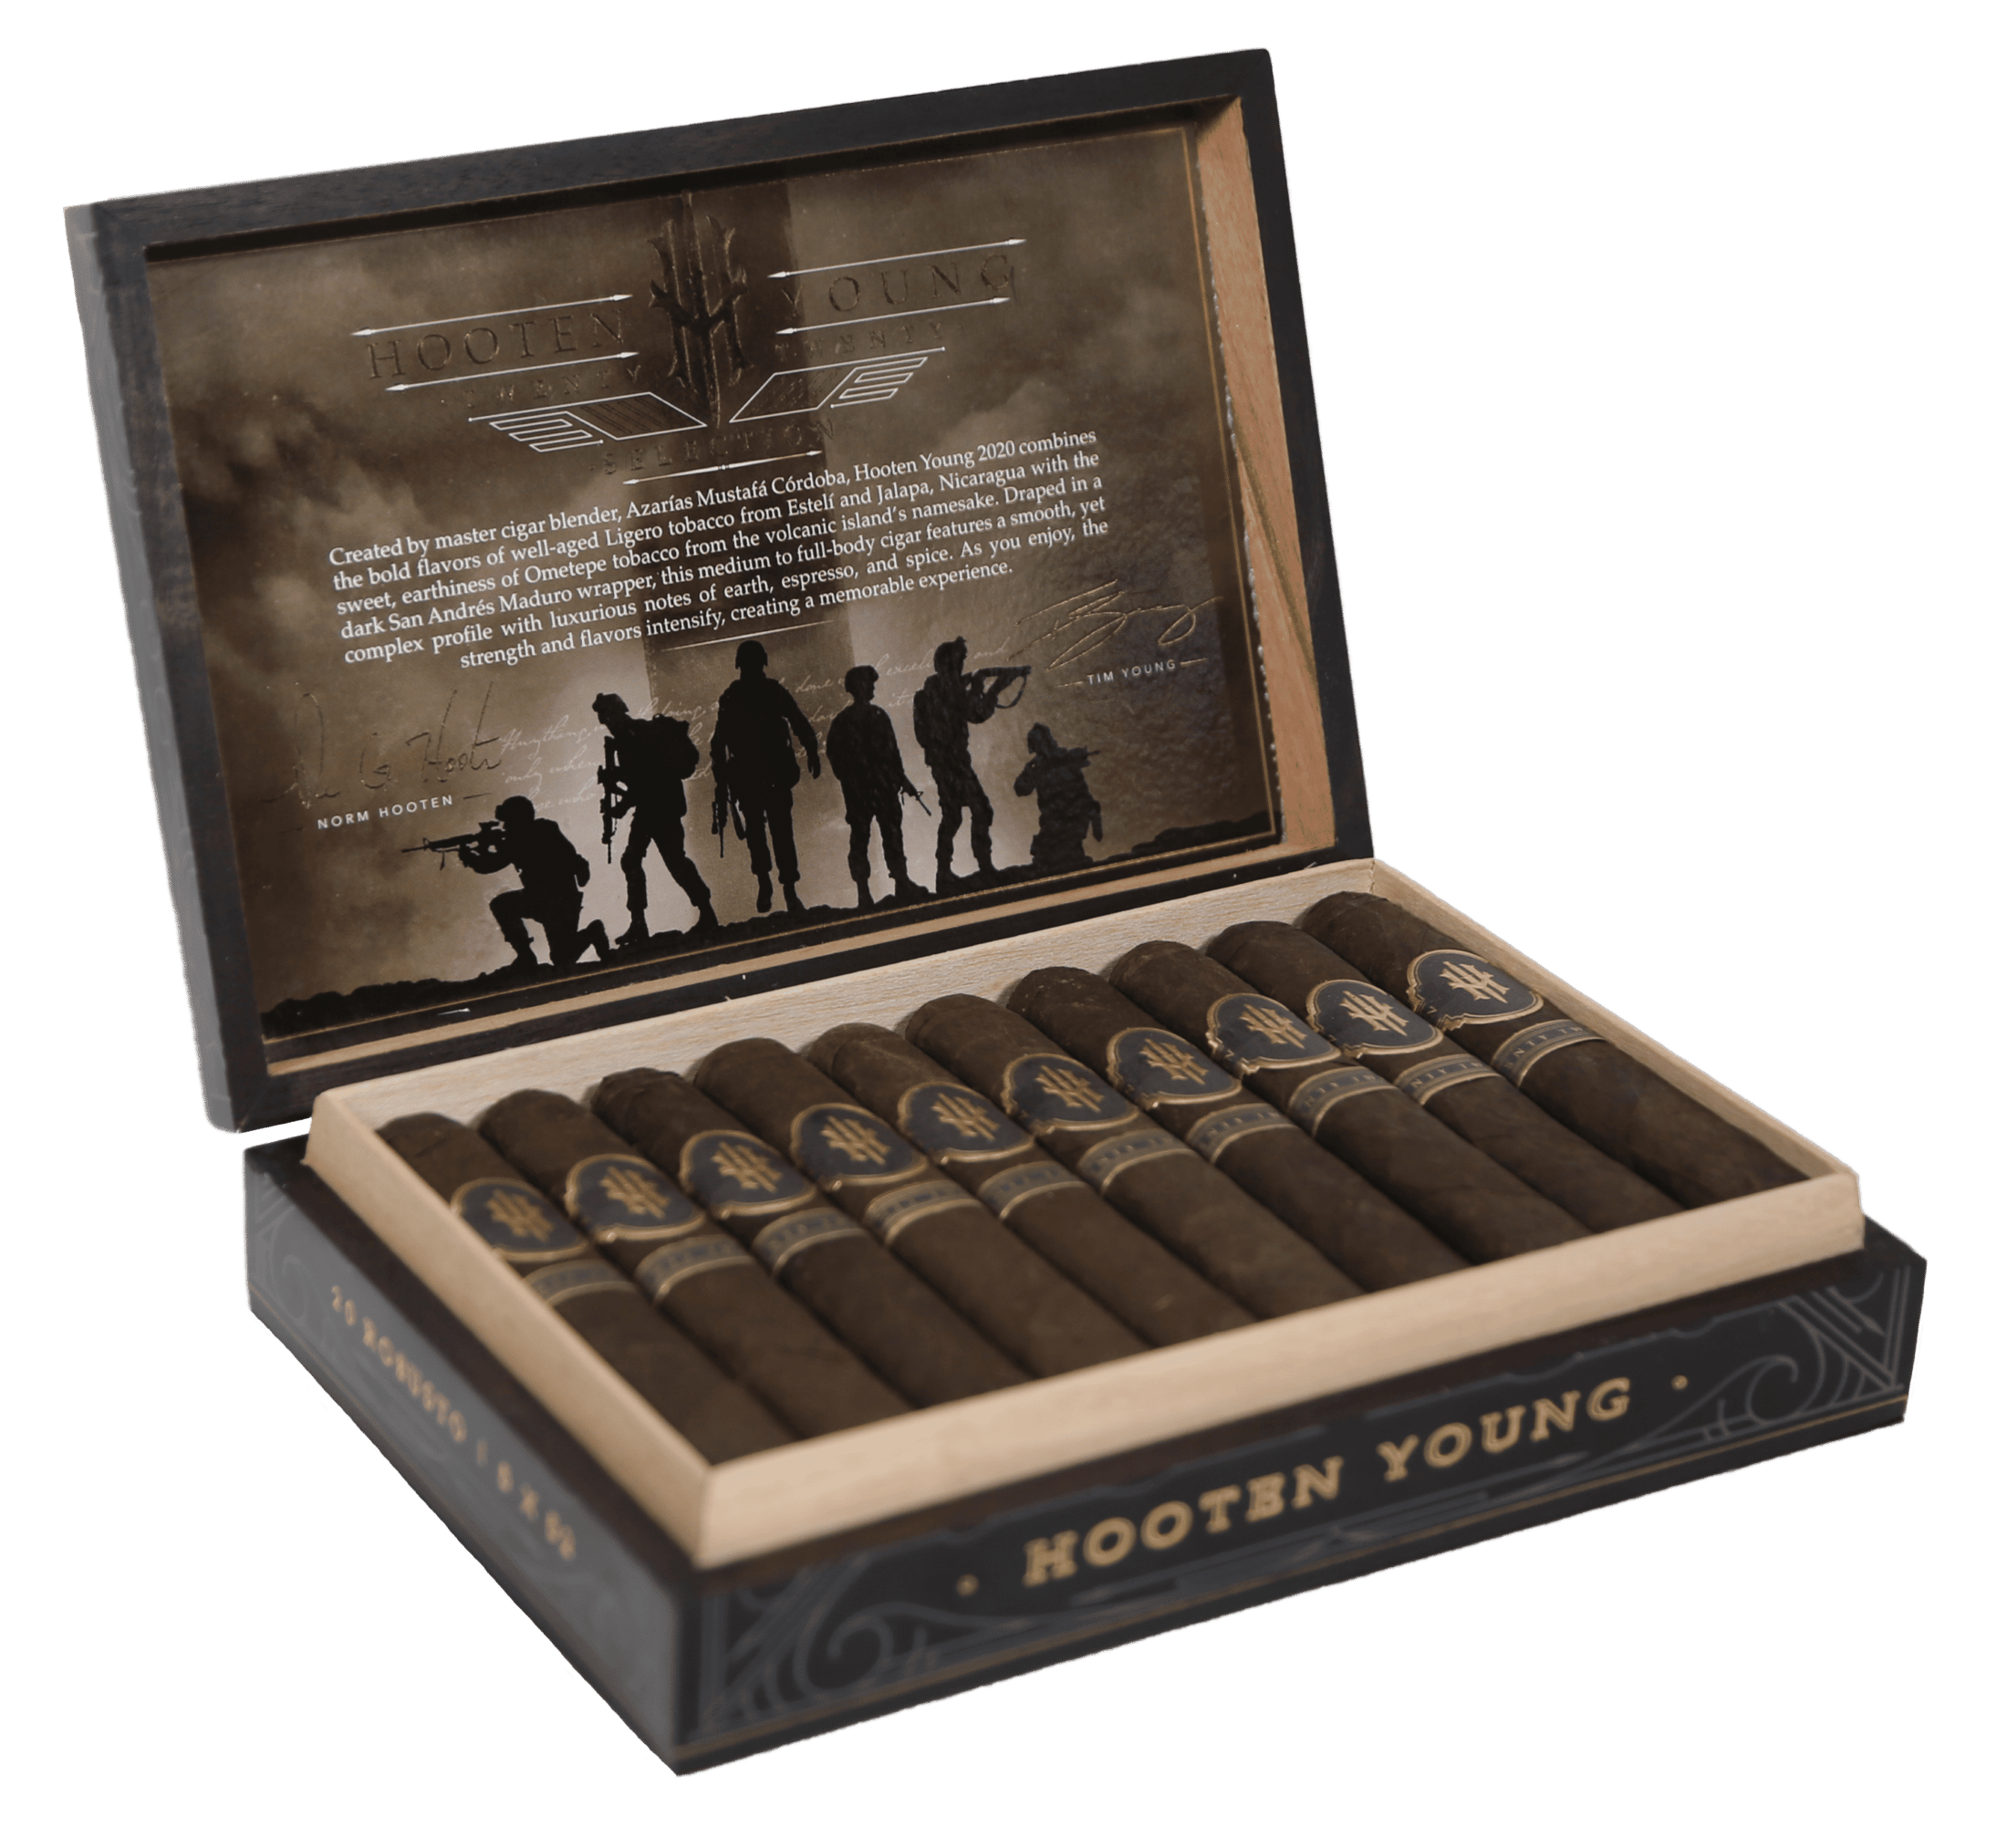 Open box of 20 count Hooten Young Robusto cigars